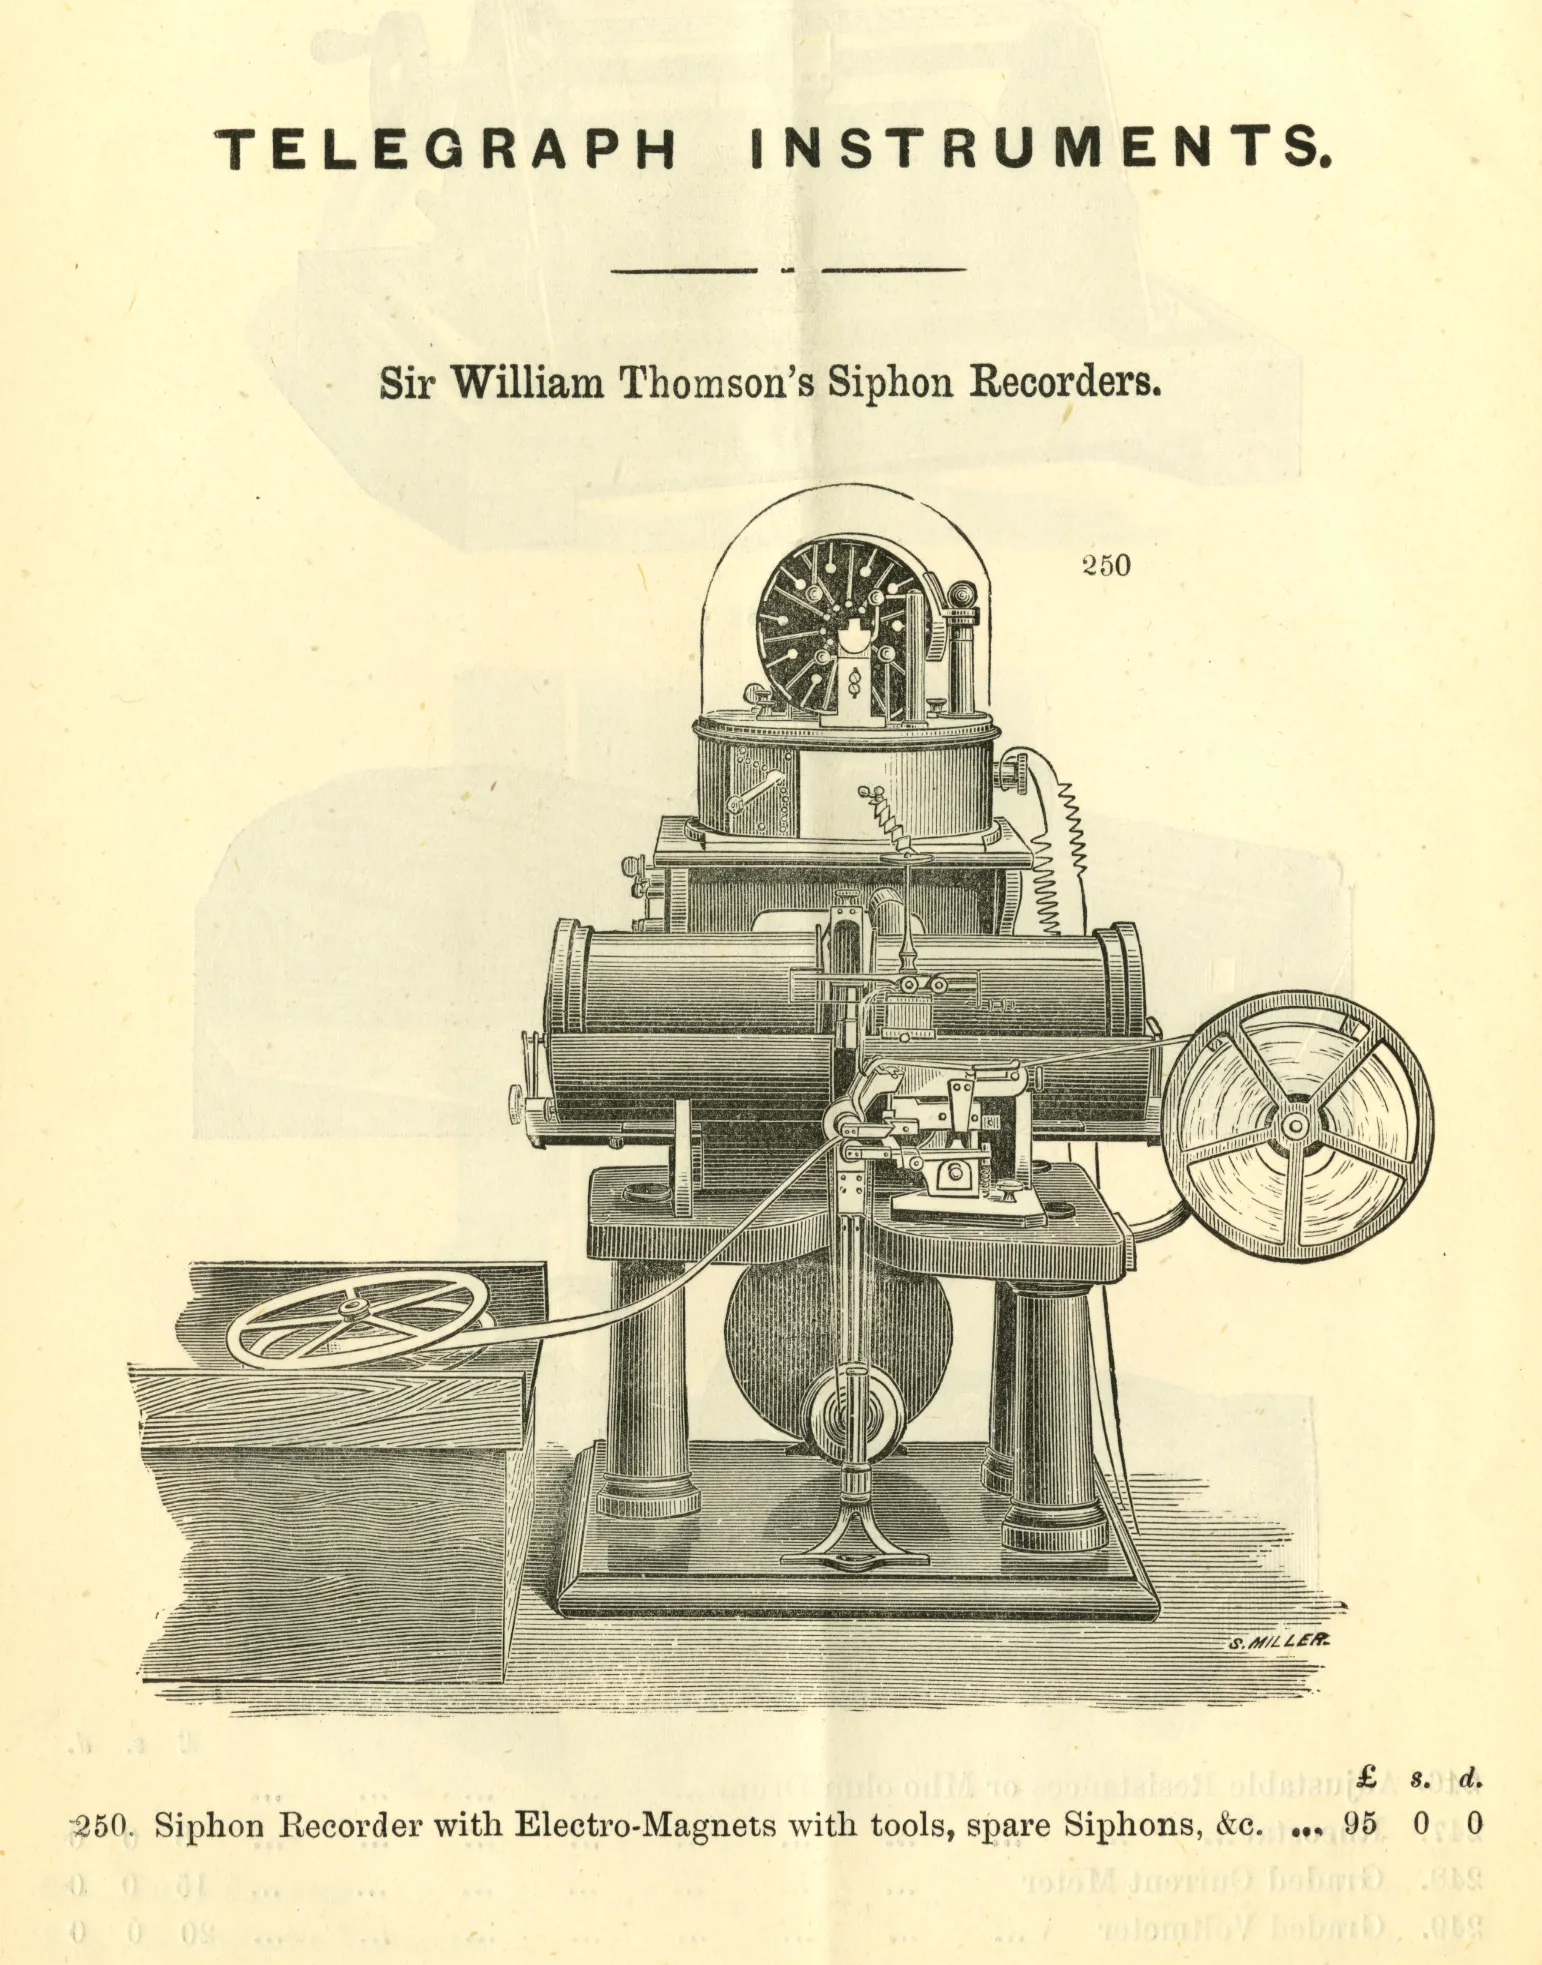 Sir William Thomson's Telegraph Instrument: Siphon Recorder with Electro-magnets ref. SPT164/8